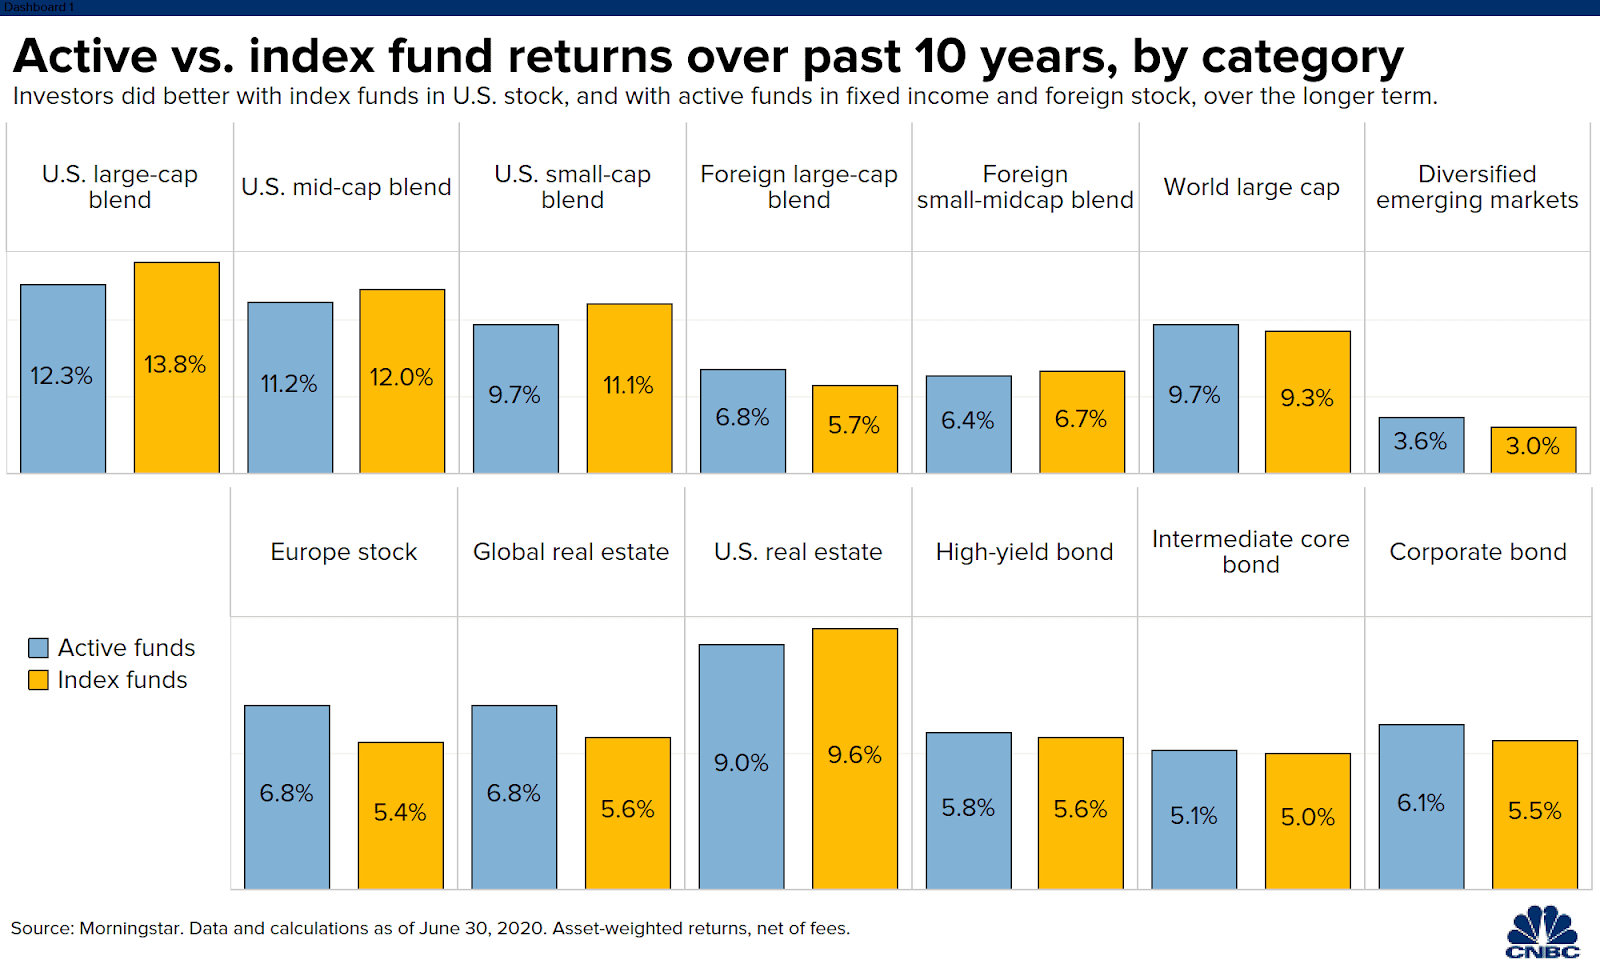 Active vs. Index Fund Returns Over Past 10 Years | CNBC